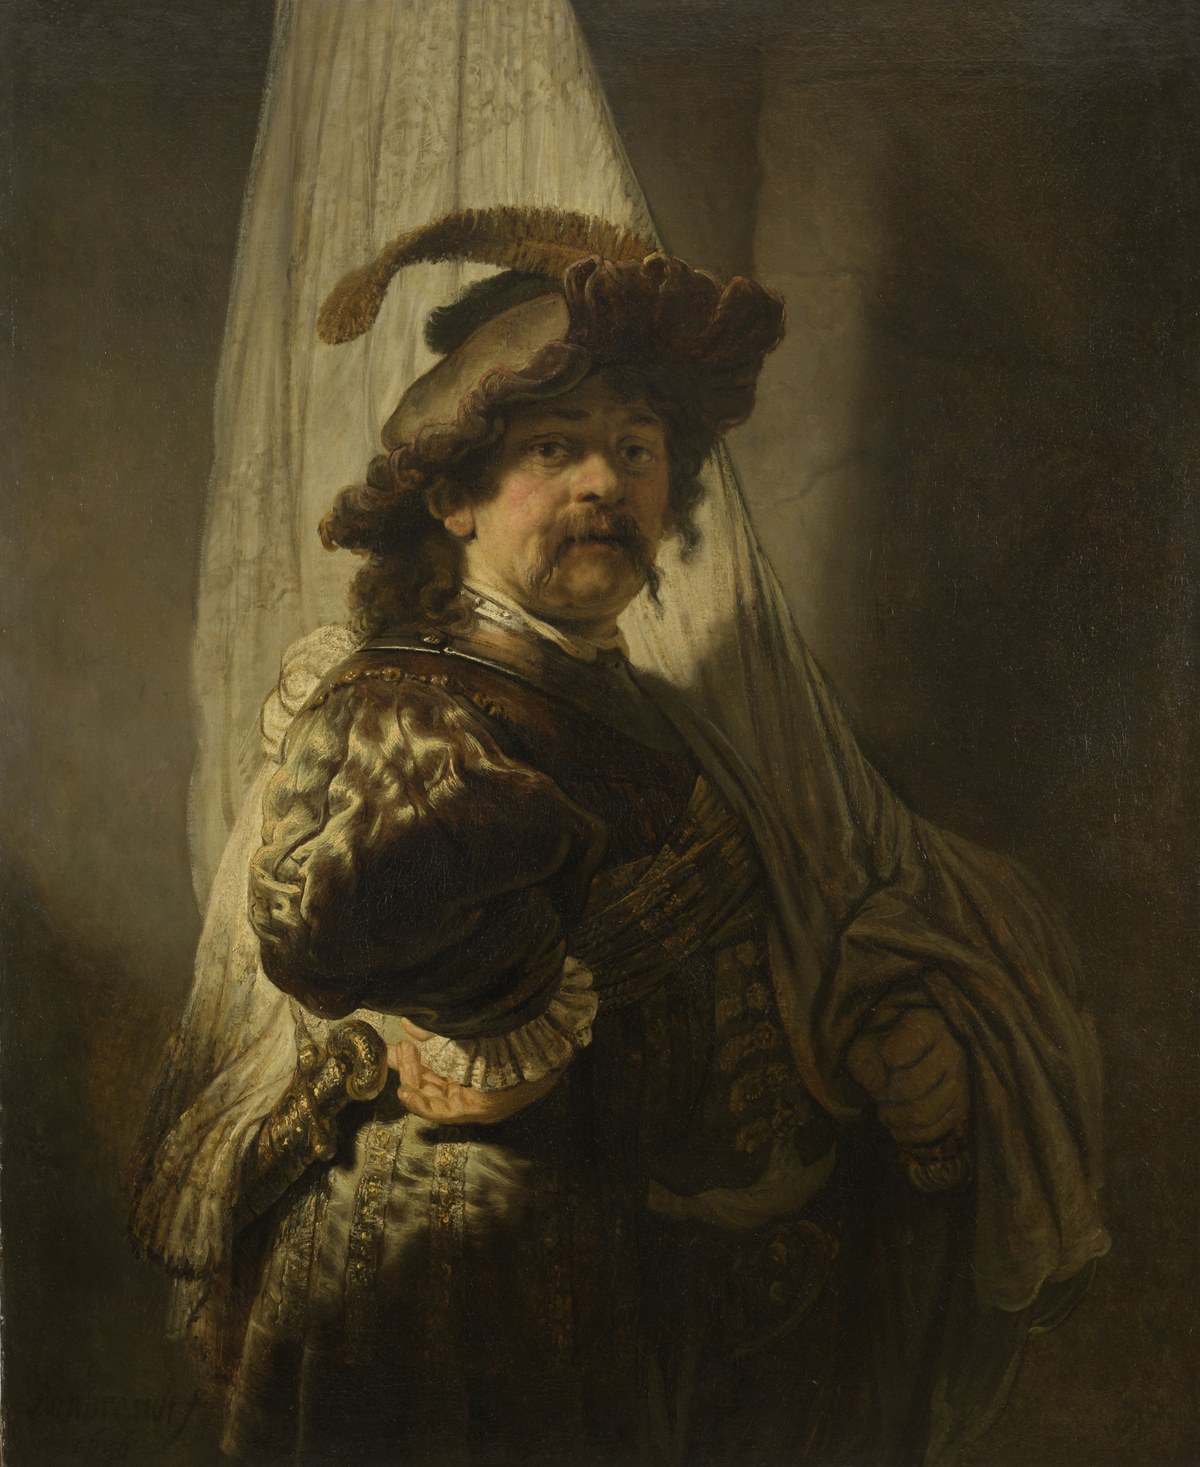 Canvas depicting A 17th century Standard Bearer painted by Rembrandt